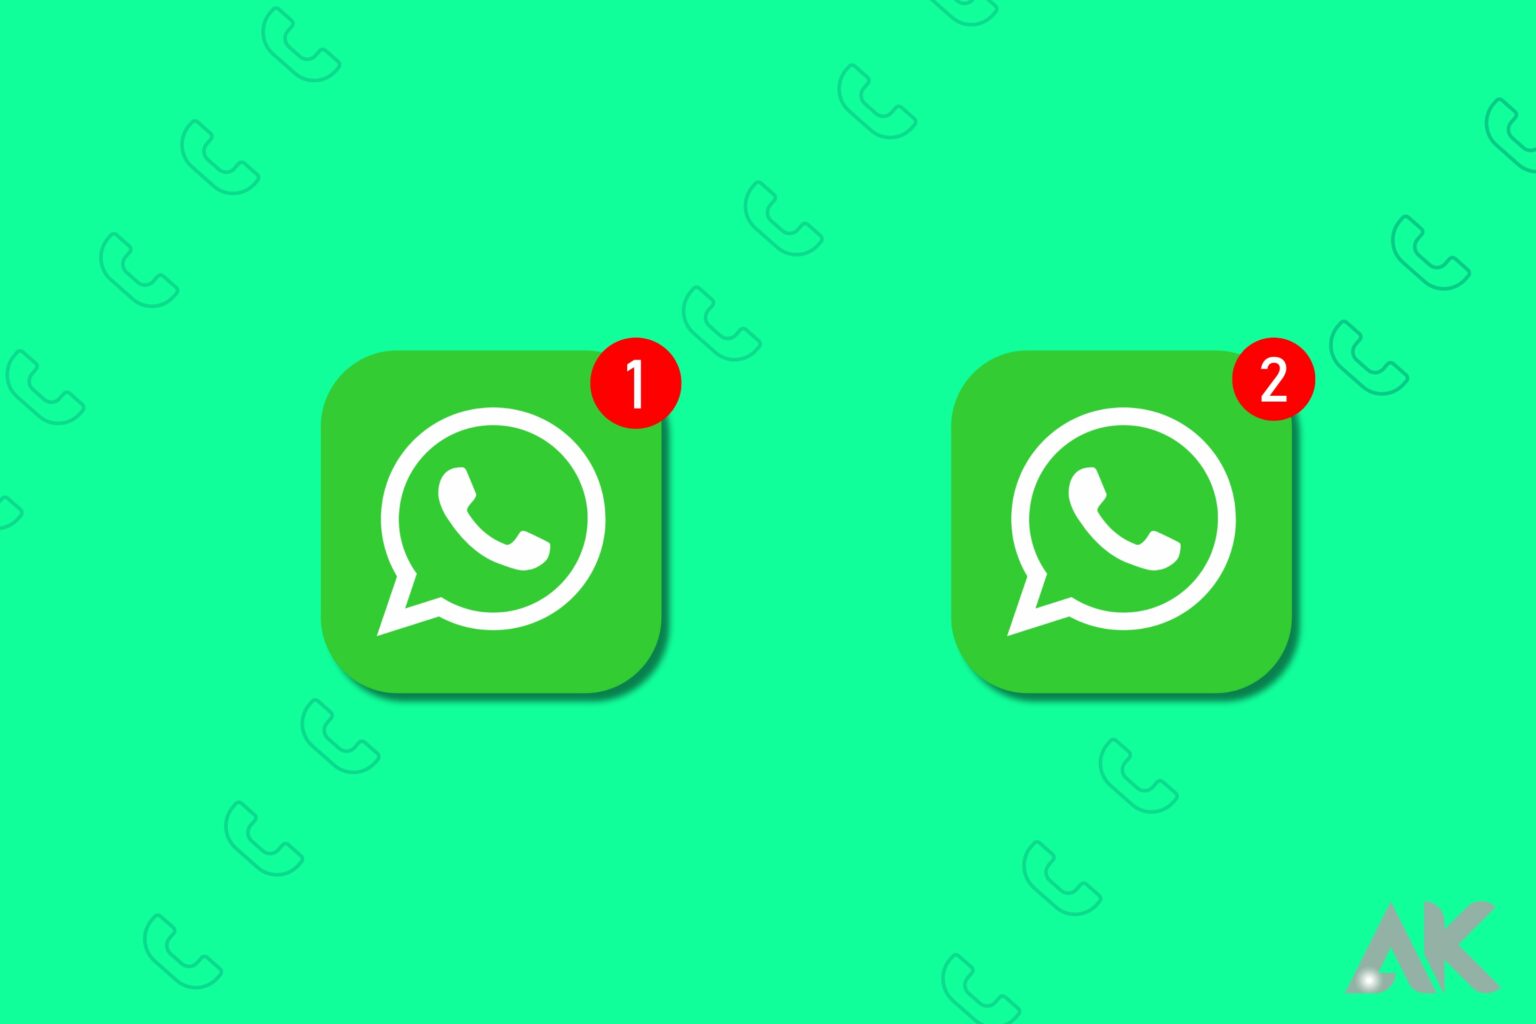 How to make use of two WhatsApp accounts on an iPhone